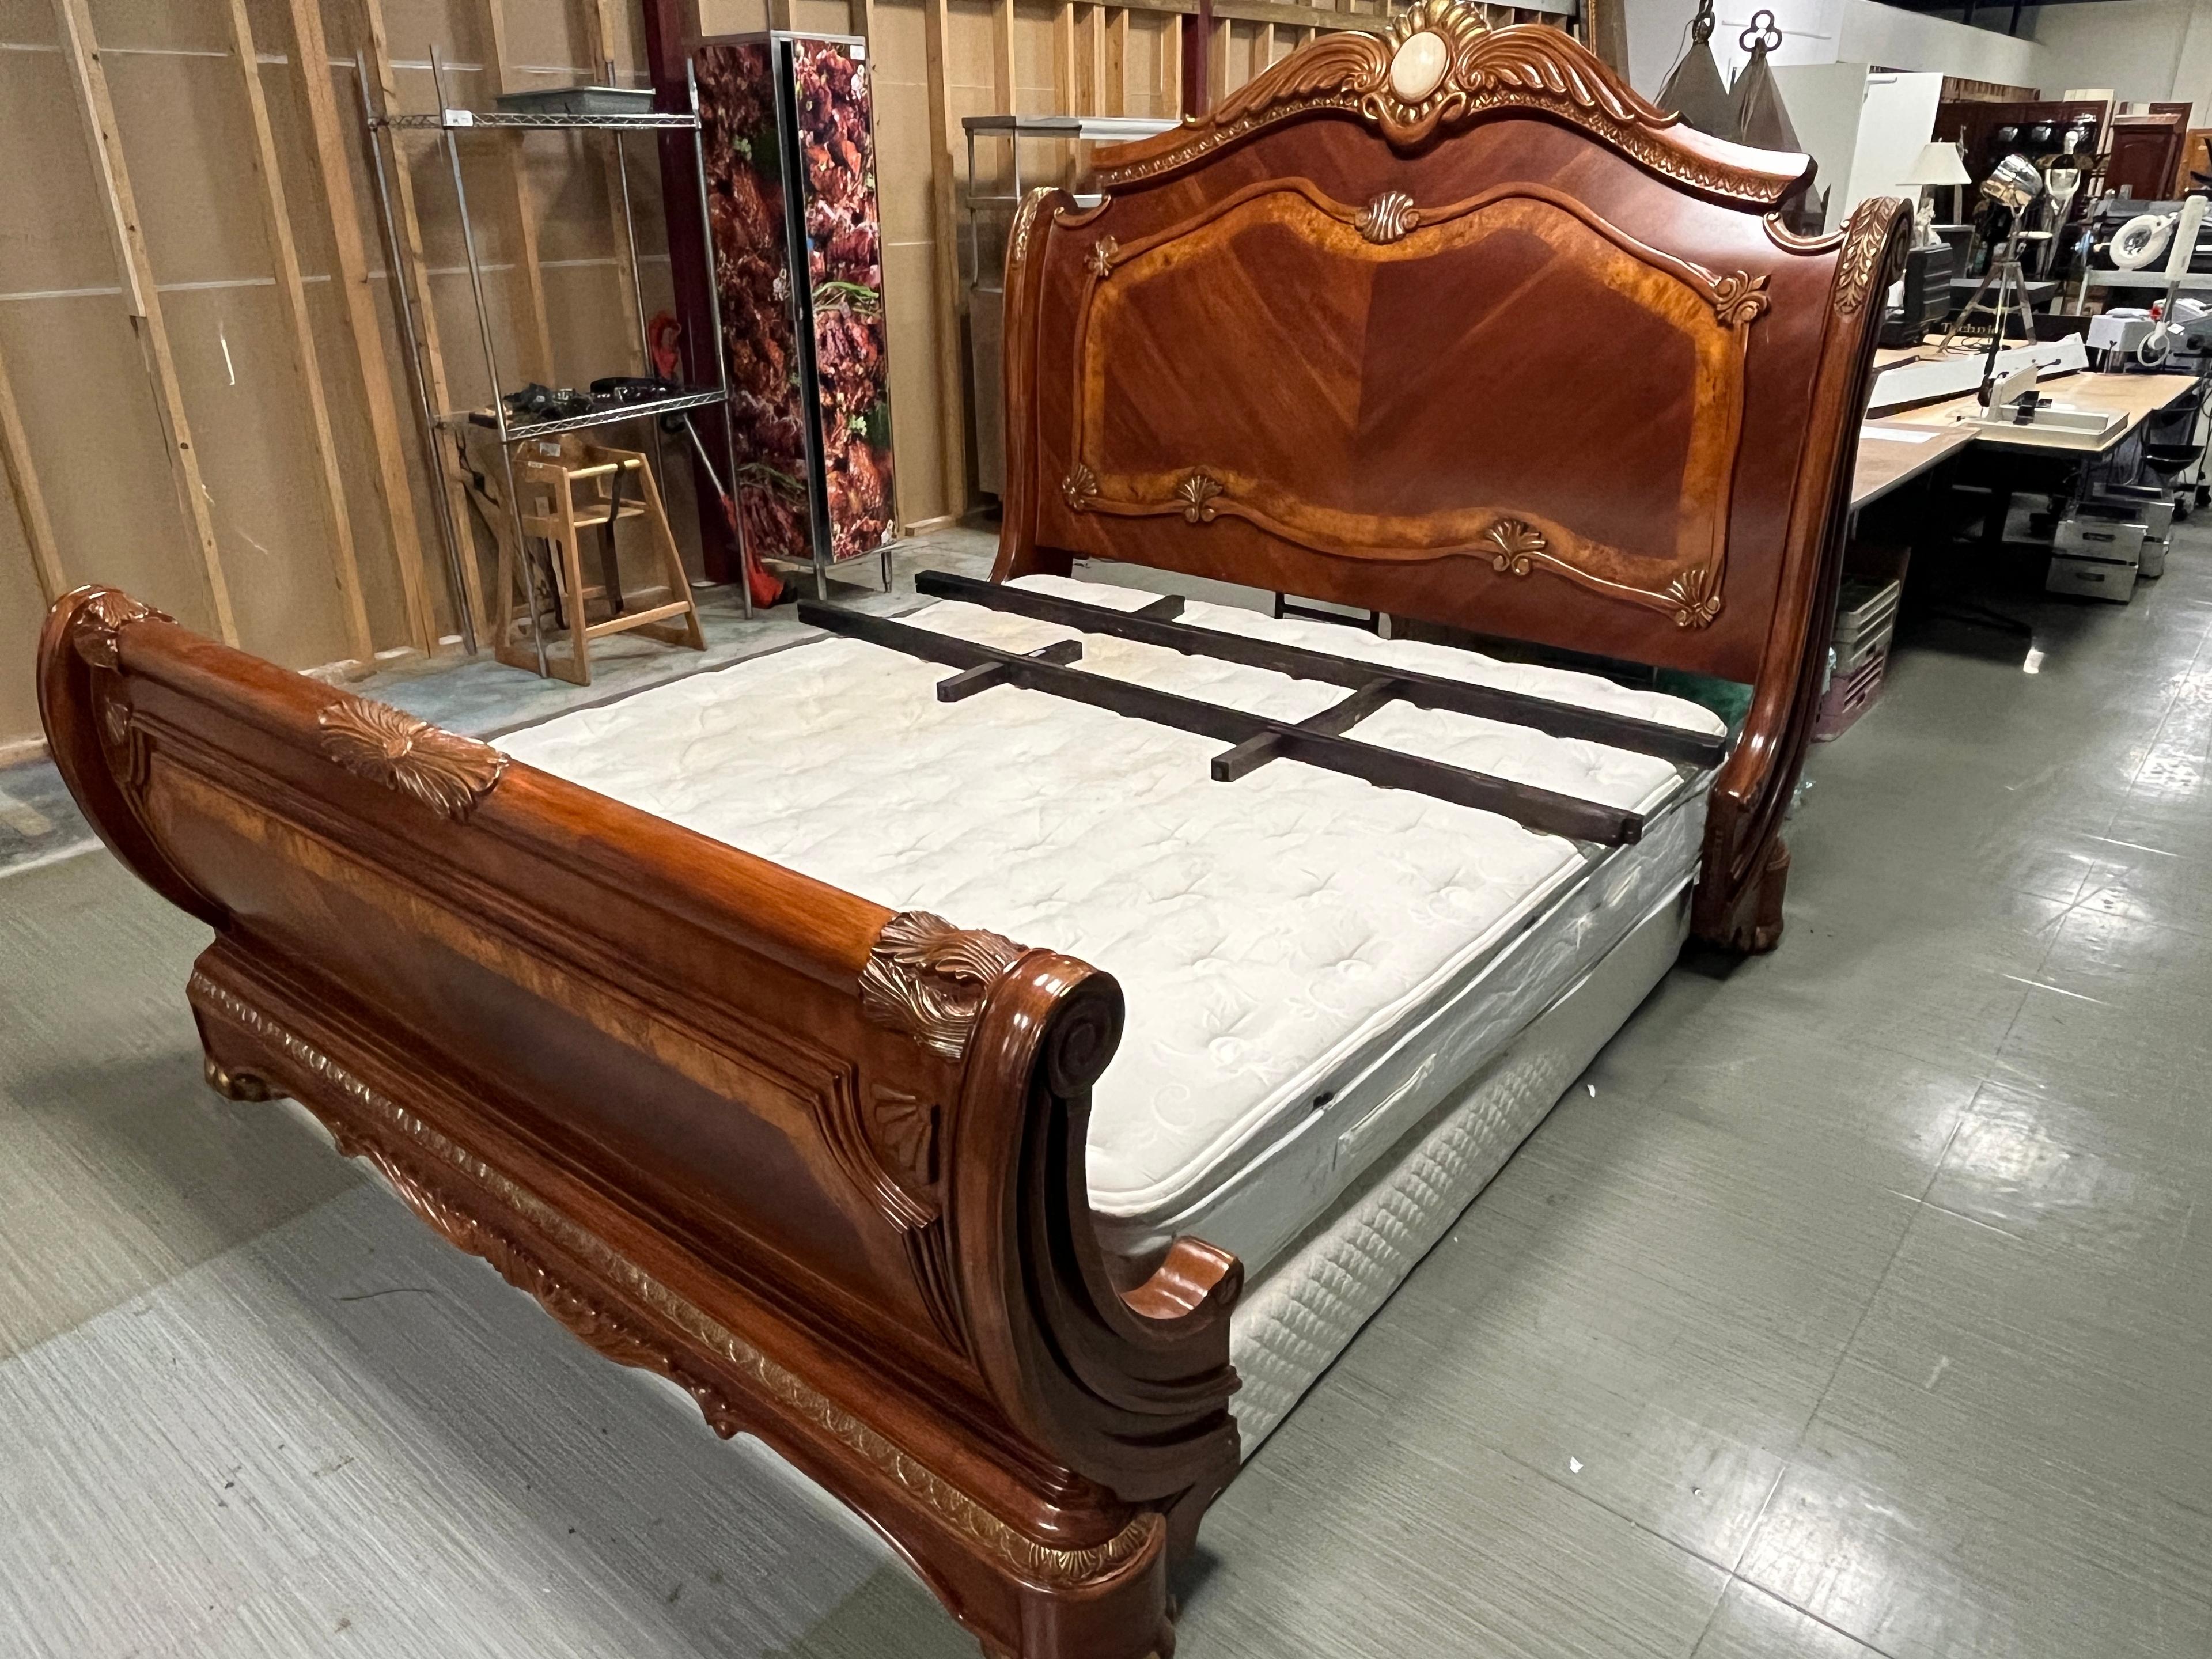 King Size Bed W/ Foot Board, Head Board, Mattress & Frame / Complete King Size Bed W/ SERTA Perfect